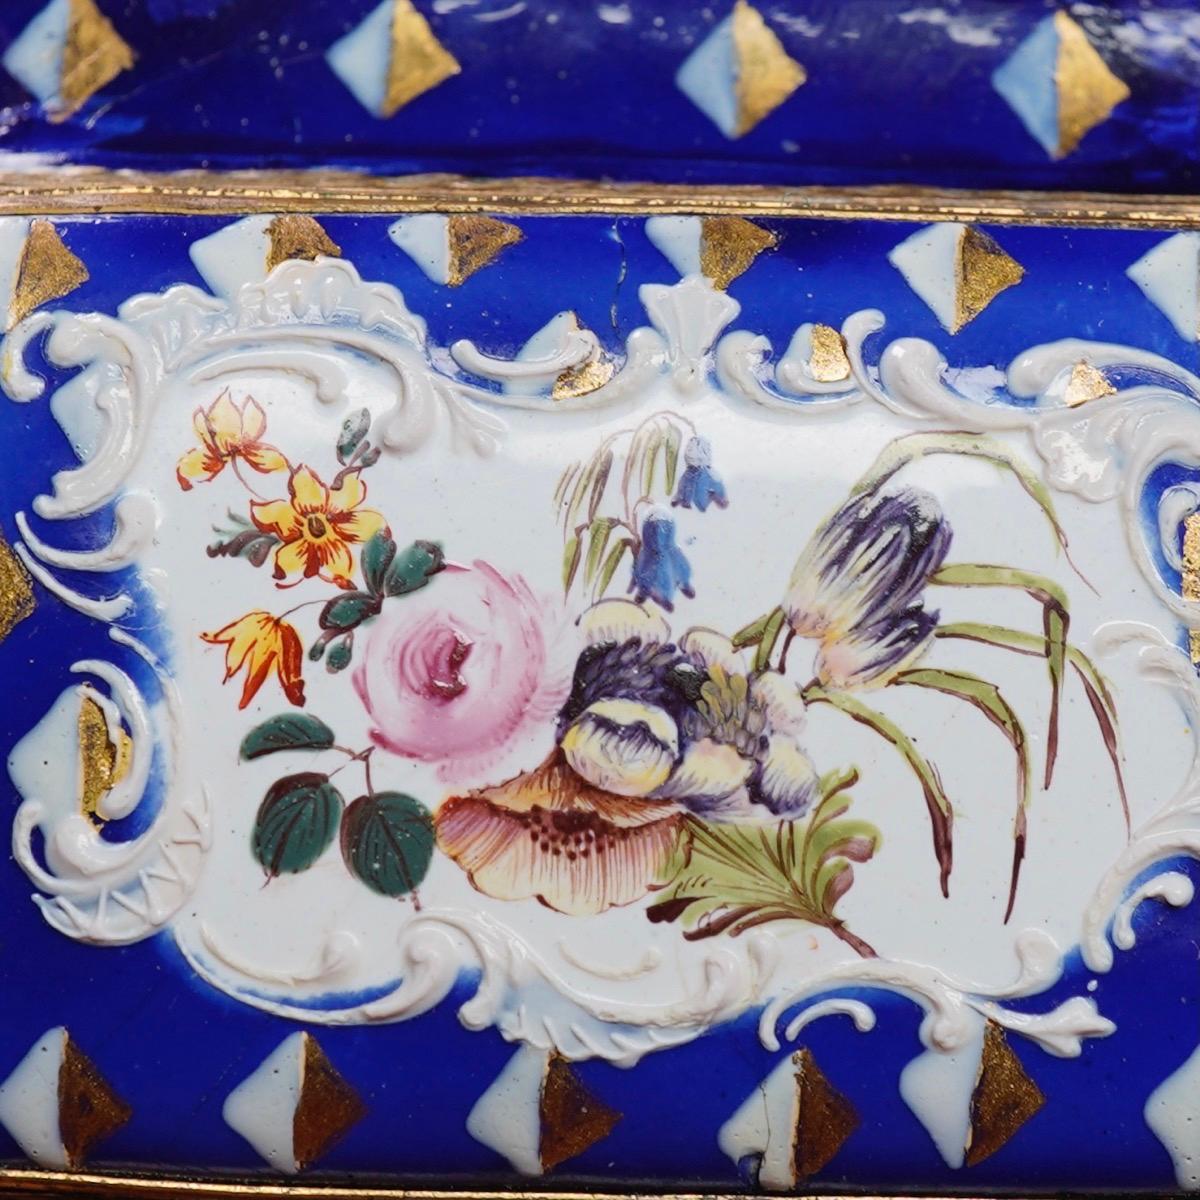 English enamel box of rectangular form, painted with white/gilt squares on a deep sapphire blue ground, the center with a panel of flowers set within a white Rococo scroll panel,
circa 1780.